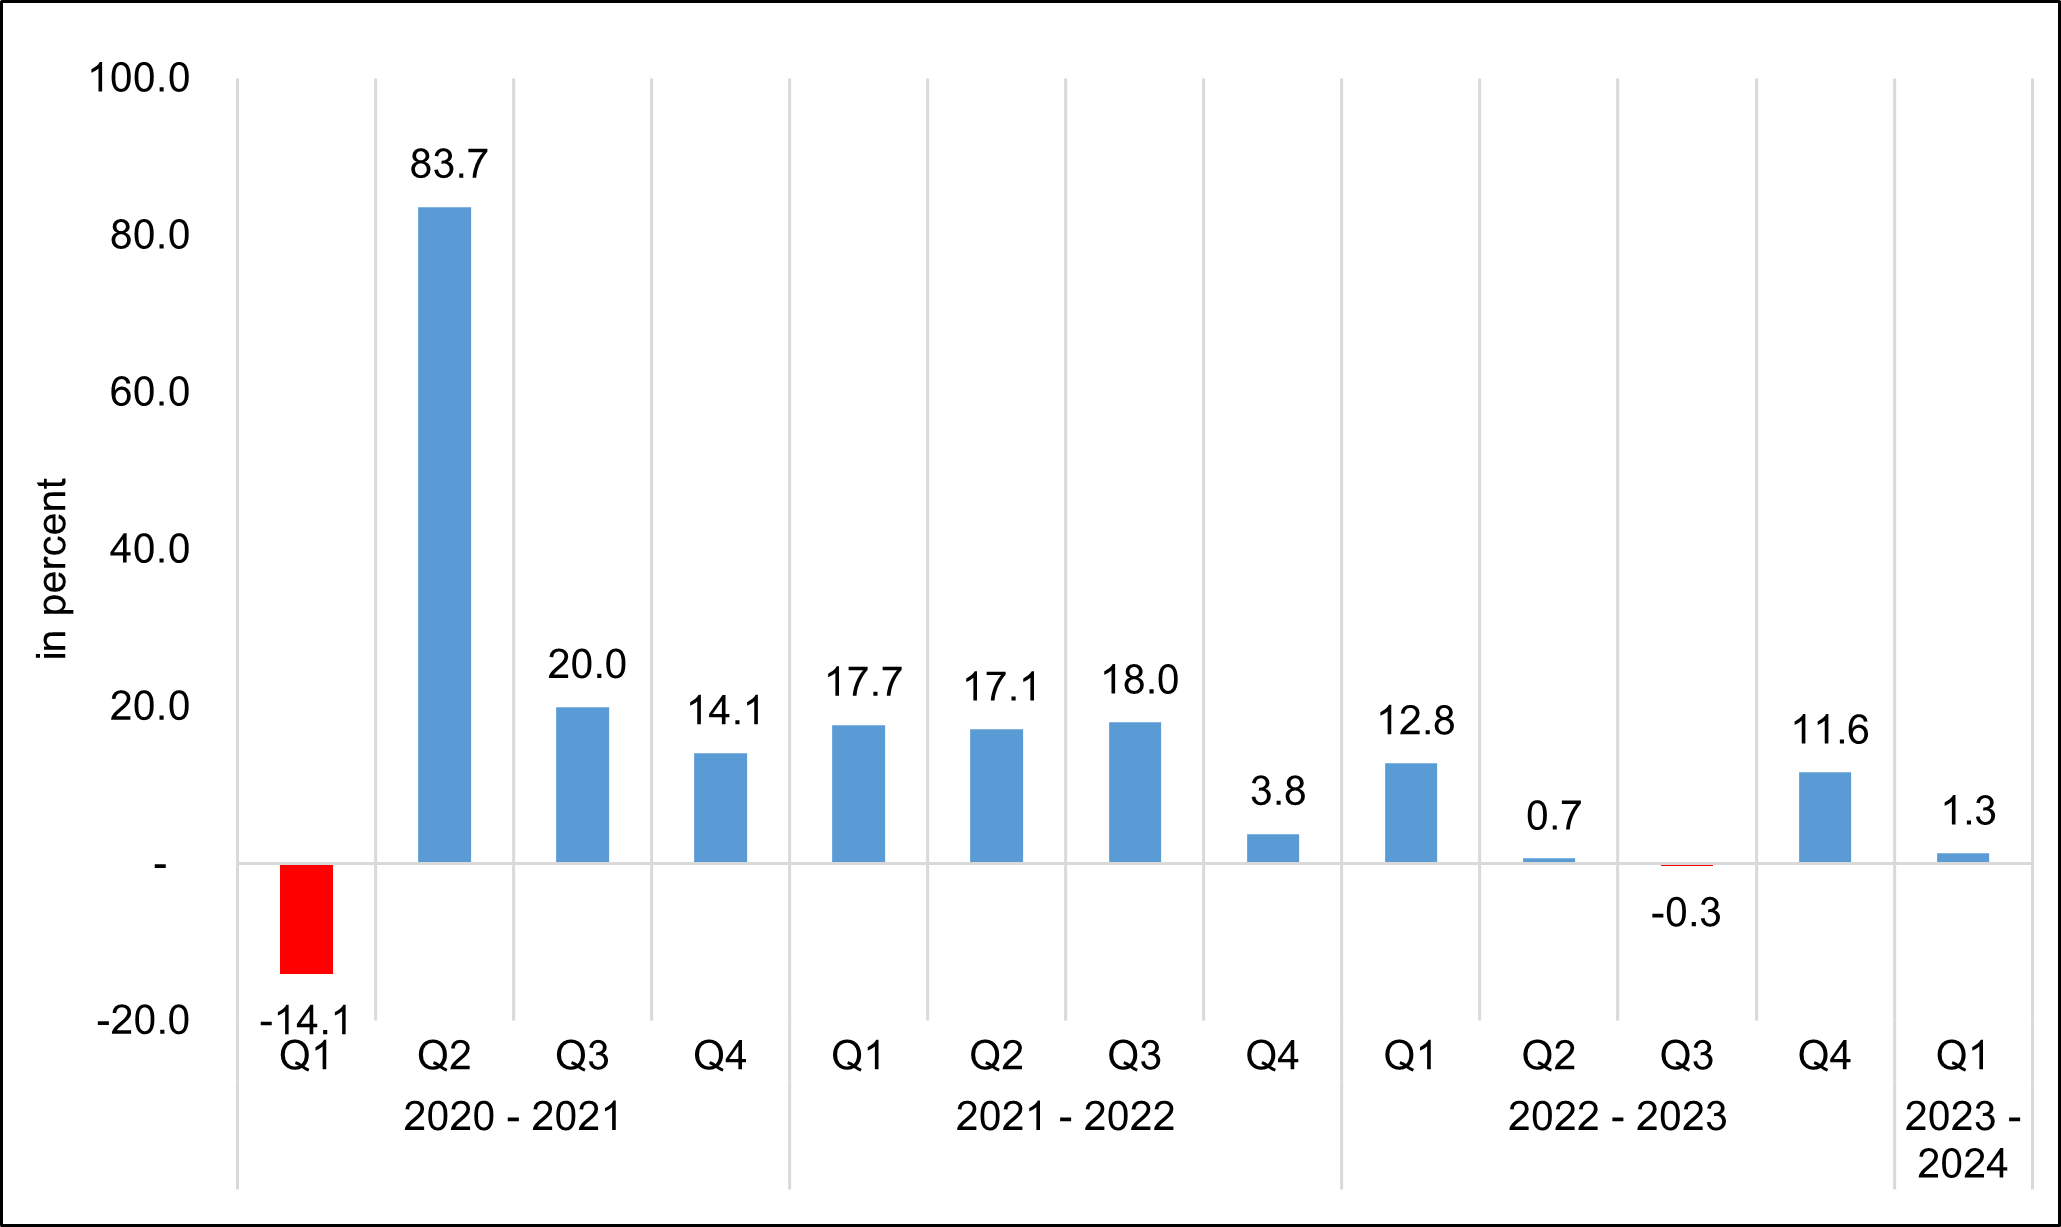 Figure 7. Gross Capital Formation,  Q1 2021 to Q1 2024 Growth Rates,  At Constant 2018 Prices